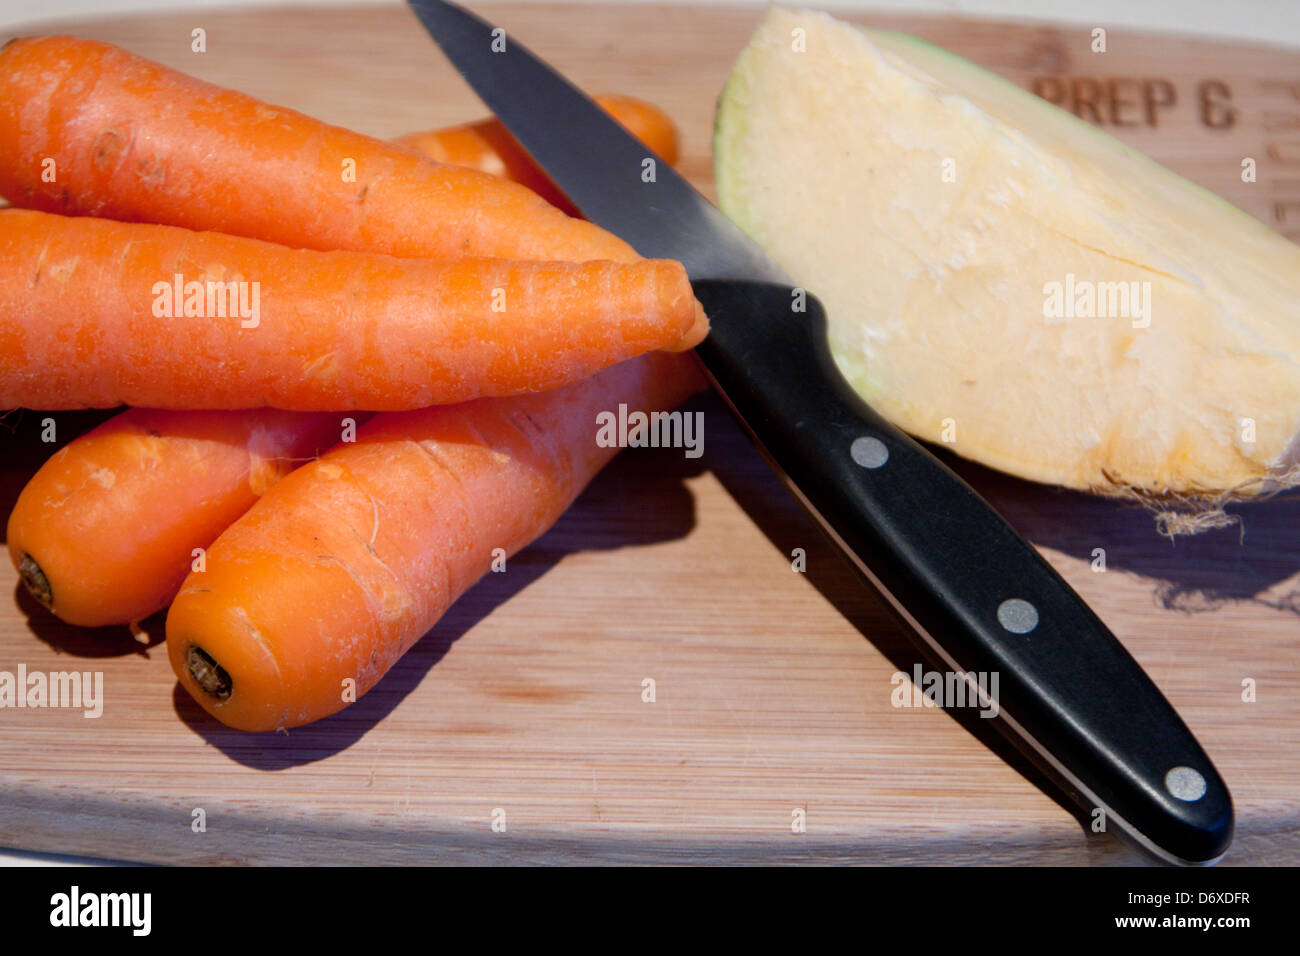 Carrot, swede and knife Stock Photo